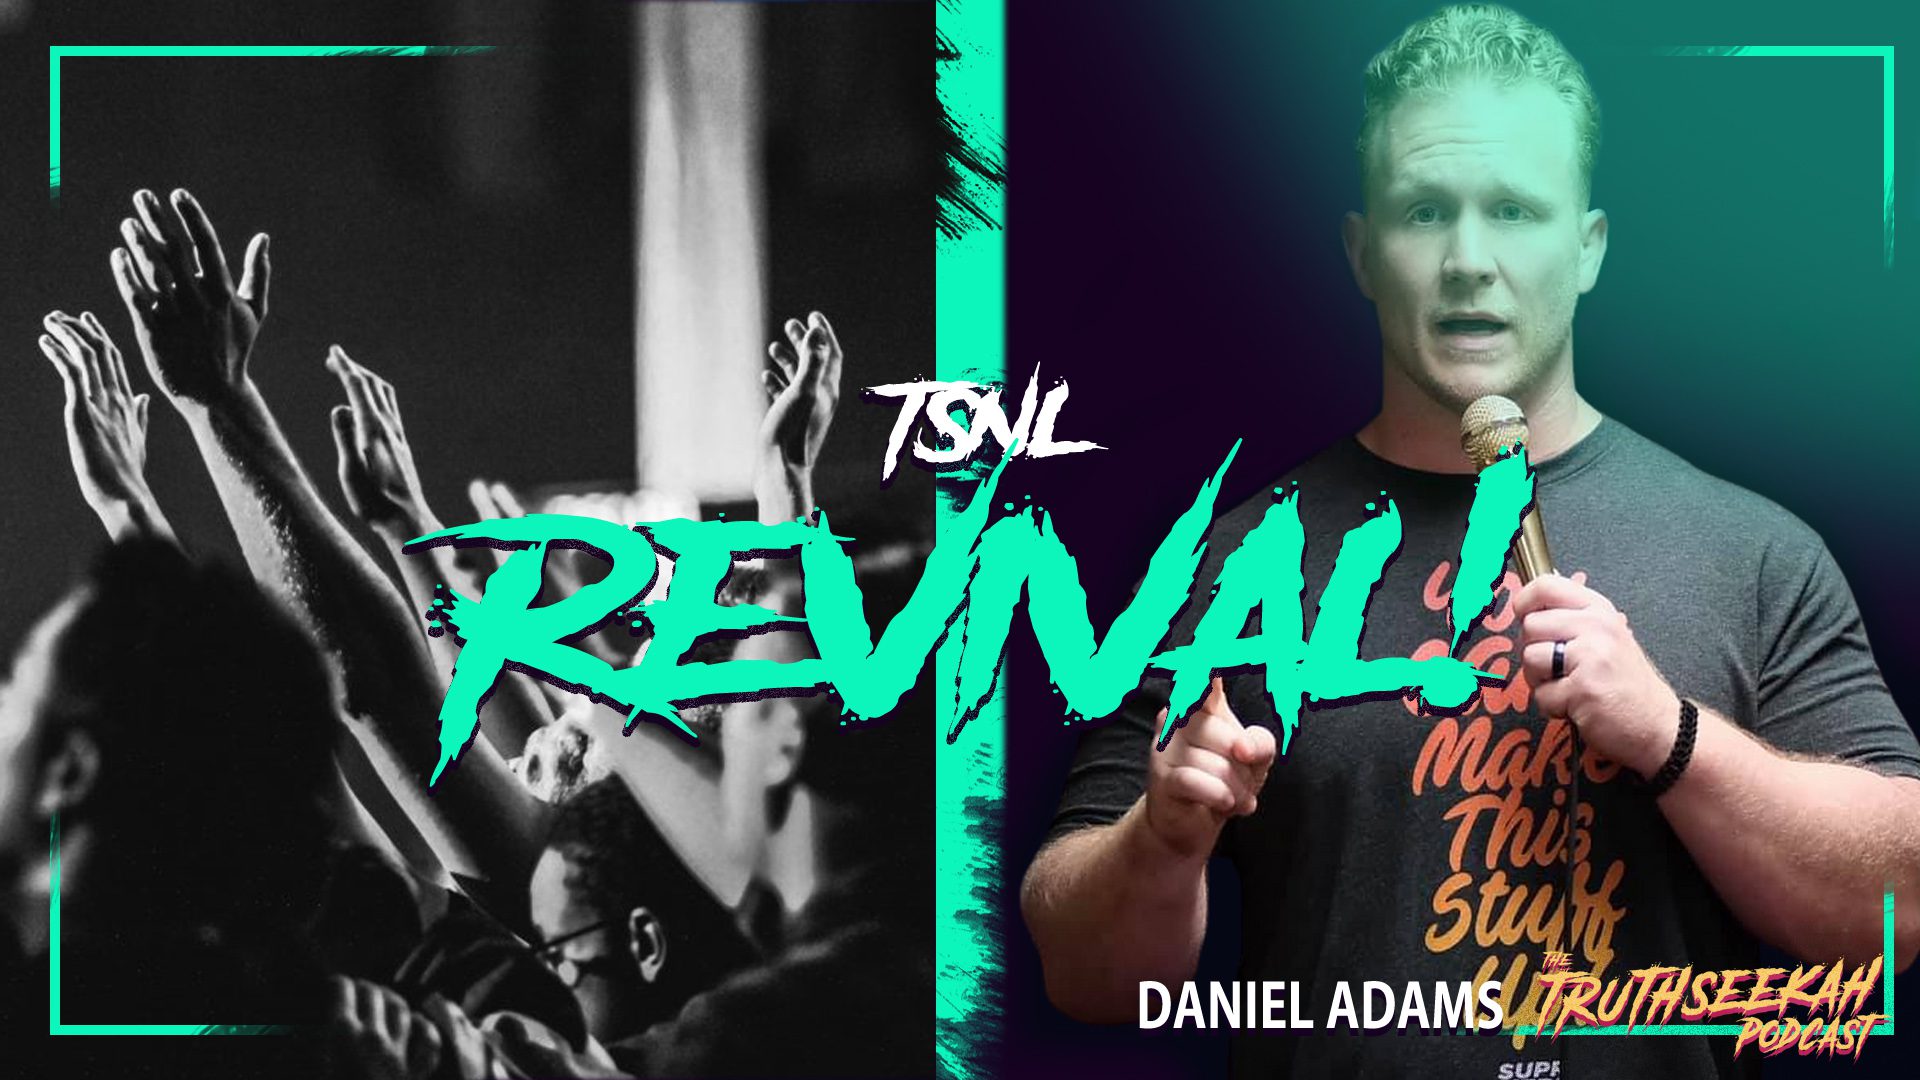 Daniel Adams Revival Is Happening On ZOOM! Deliverance and Holy Spirit Outpouring (TSNL) TruthSeekah Podcast